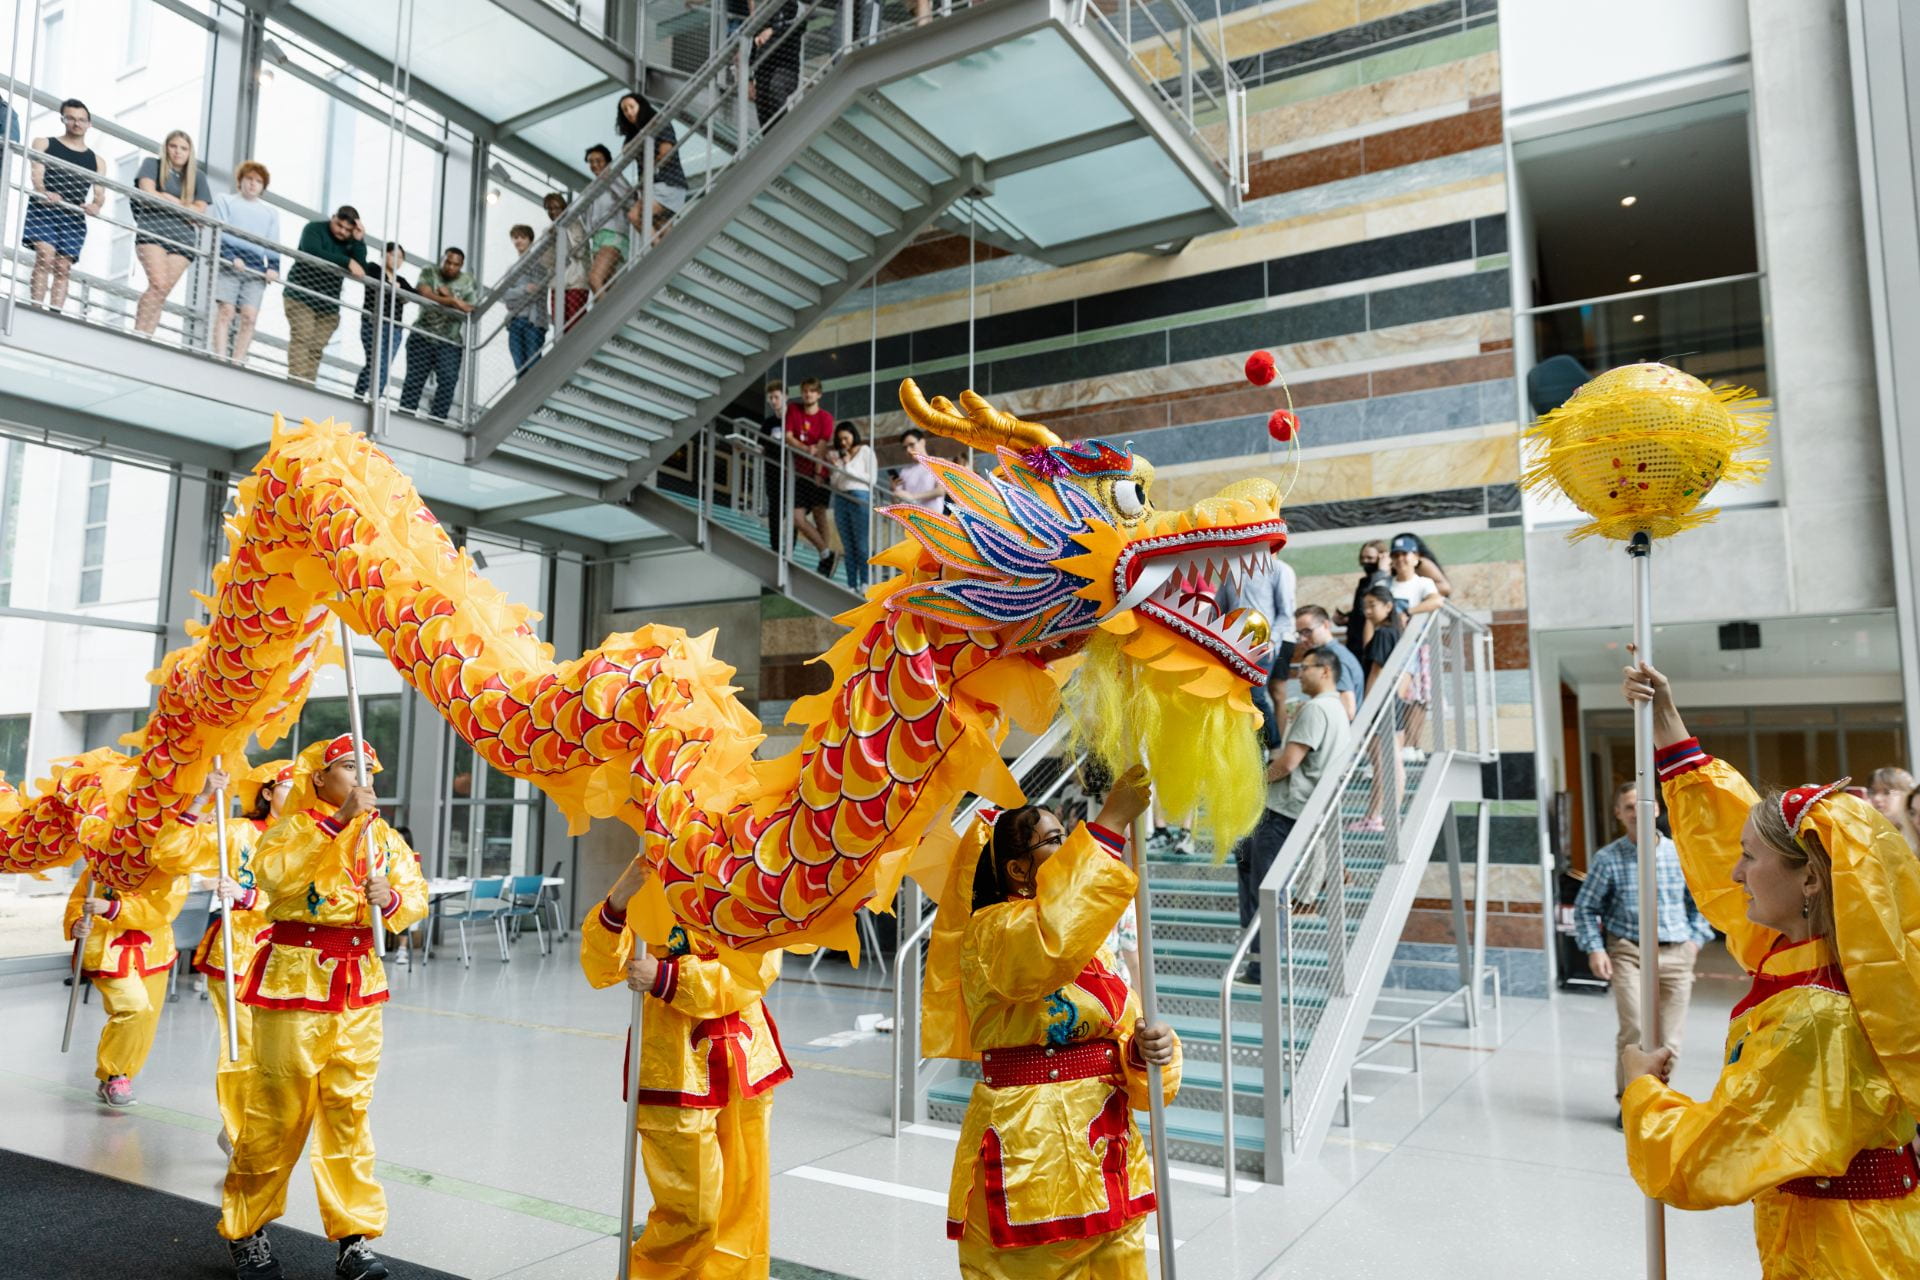 In the Hamilton Lugar School atrium, a colorful Gold, orange, and red paper dragon is held aloft on poles by five students in gold and red matching outfits. Many people line the stairs and walkway above the atrium, watching the display.